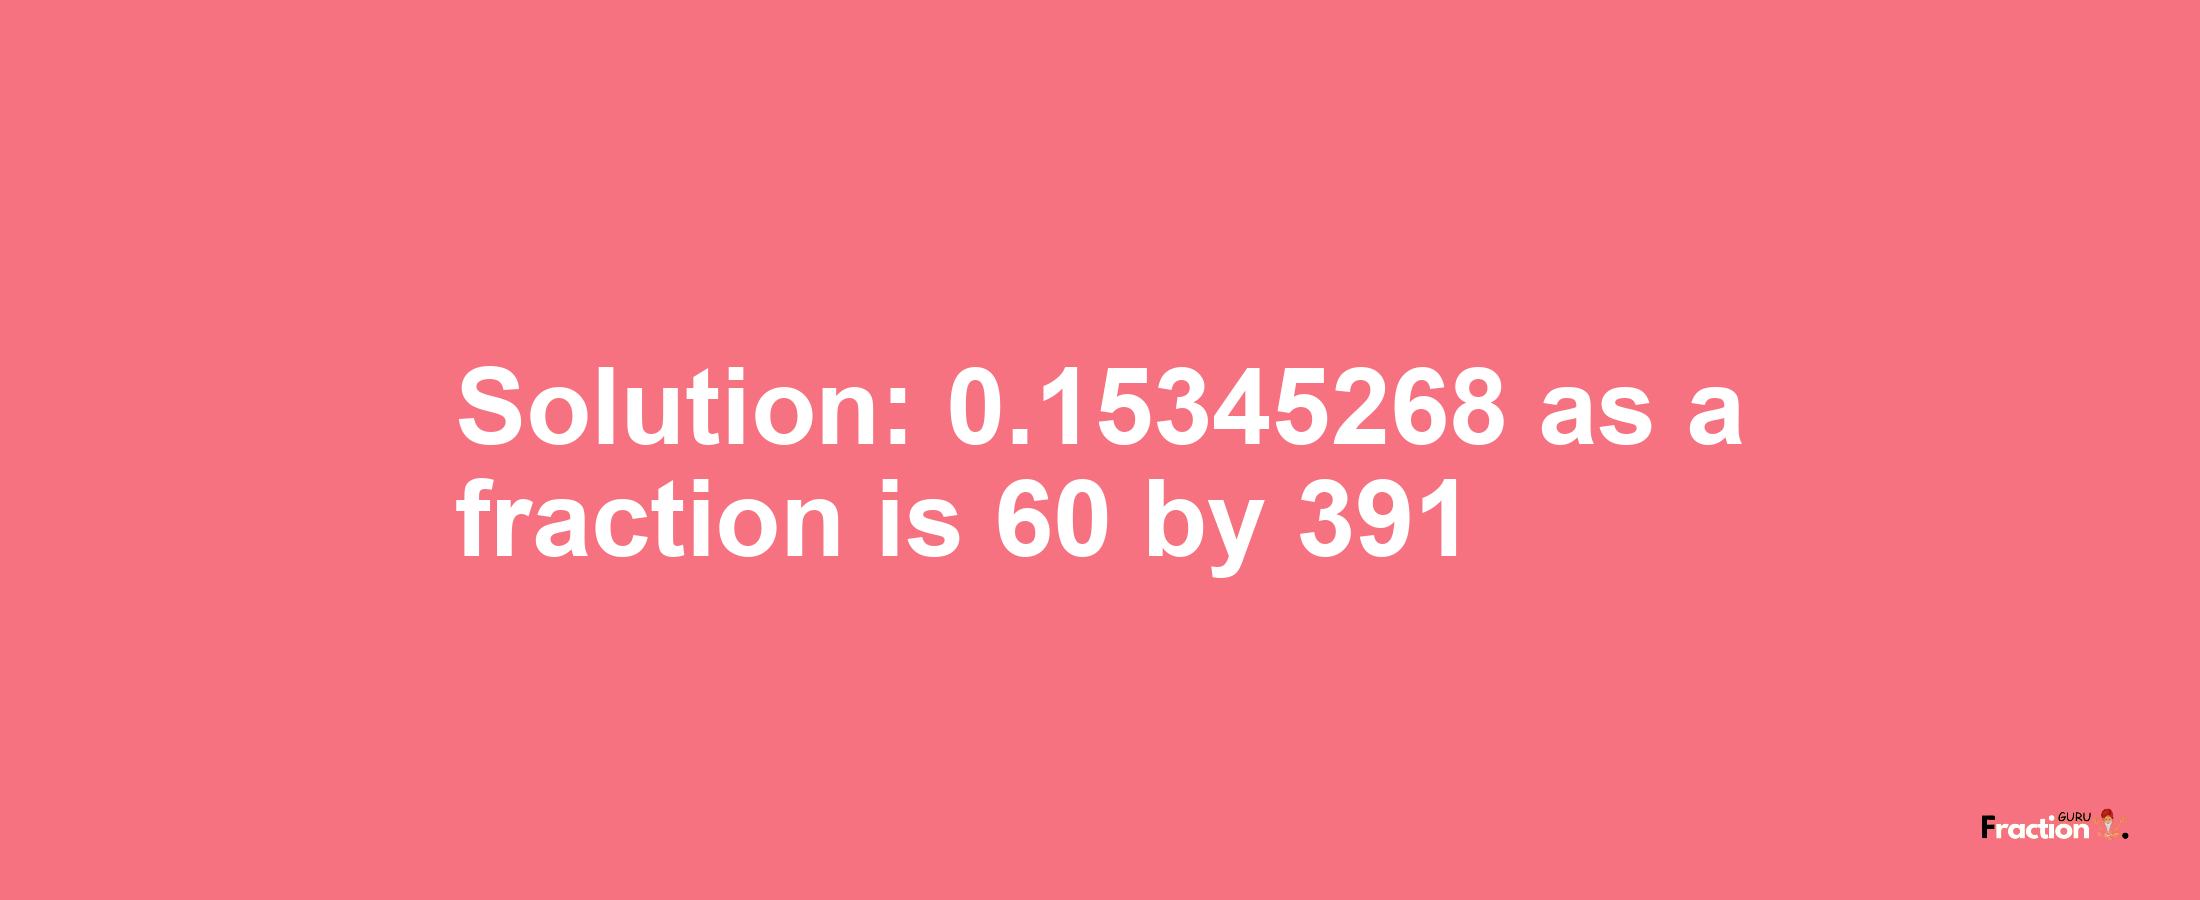 Solution:0.15345268 as a fraction is 60/391